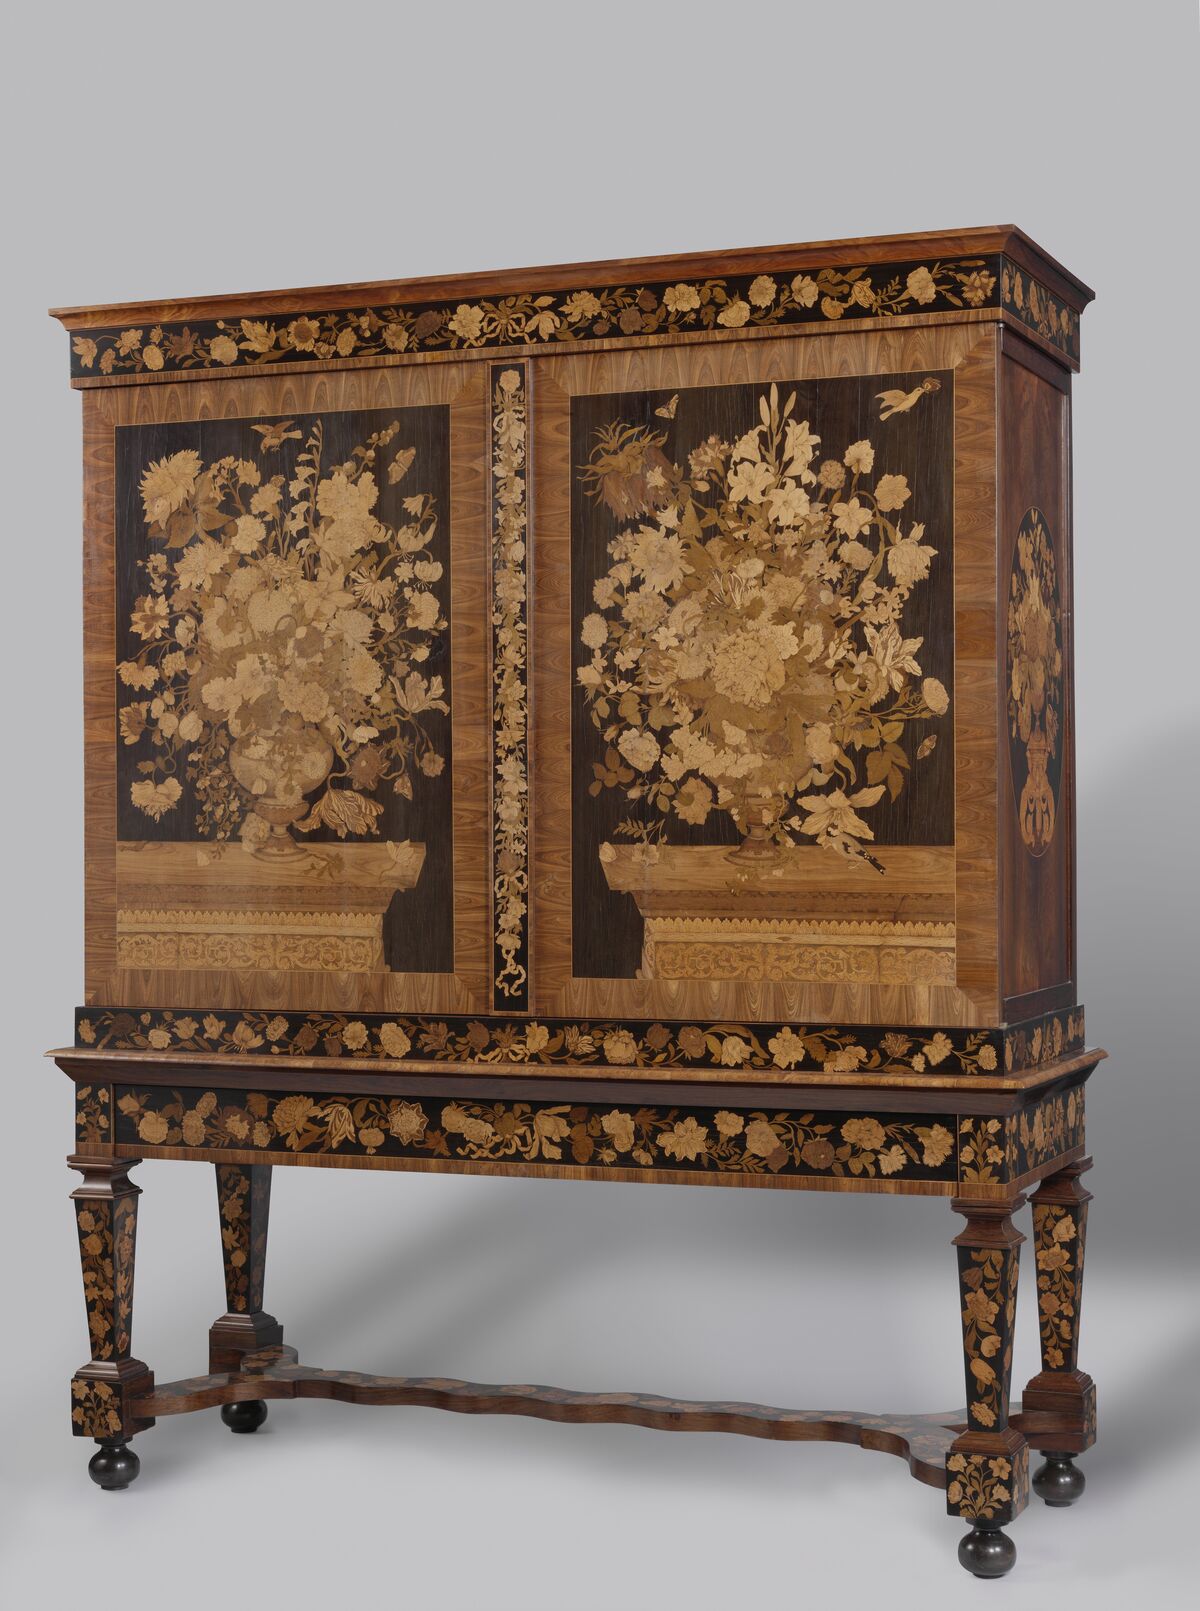 Attributed to Jan van Mekeren, Cabinet with floral marquetry, ca. 1695–1710. Courtesy of the Rijksmuseum.